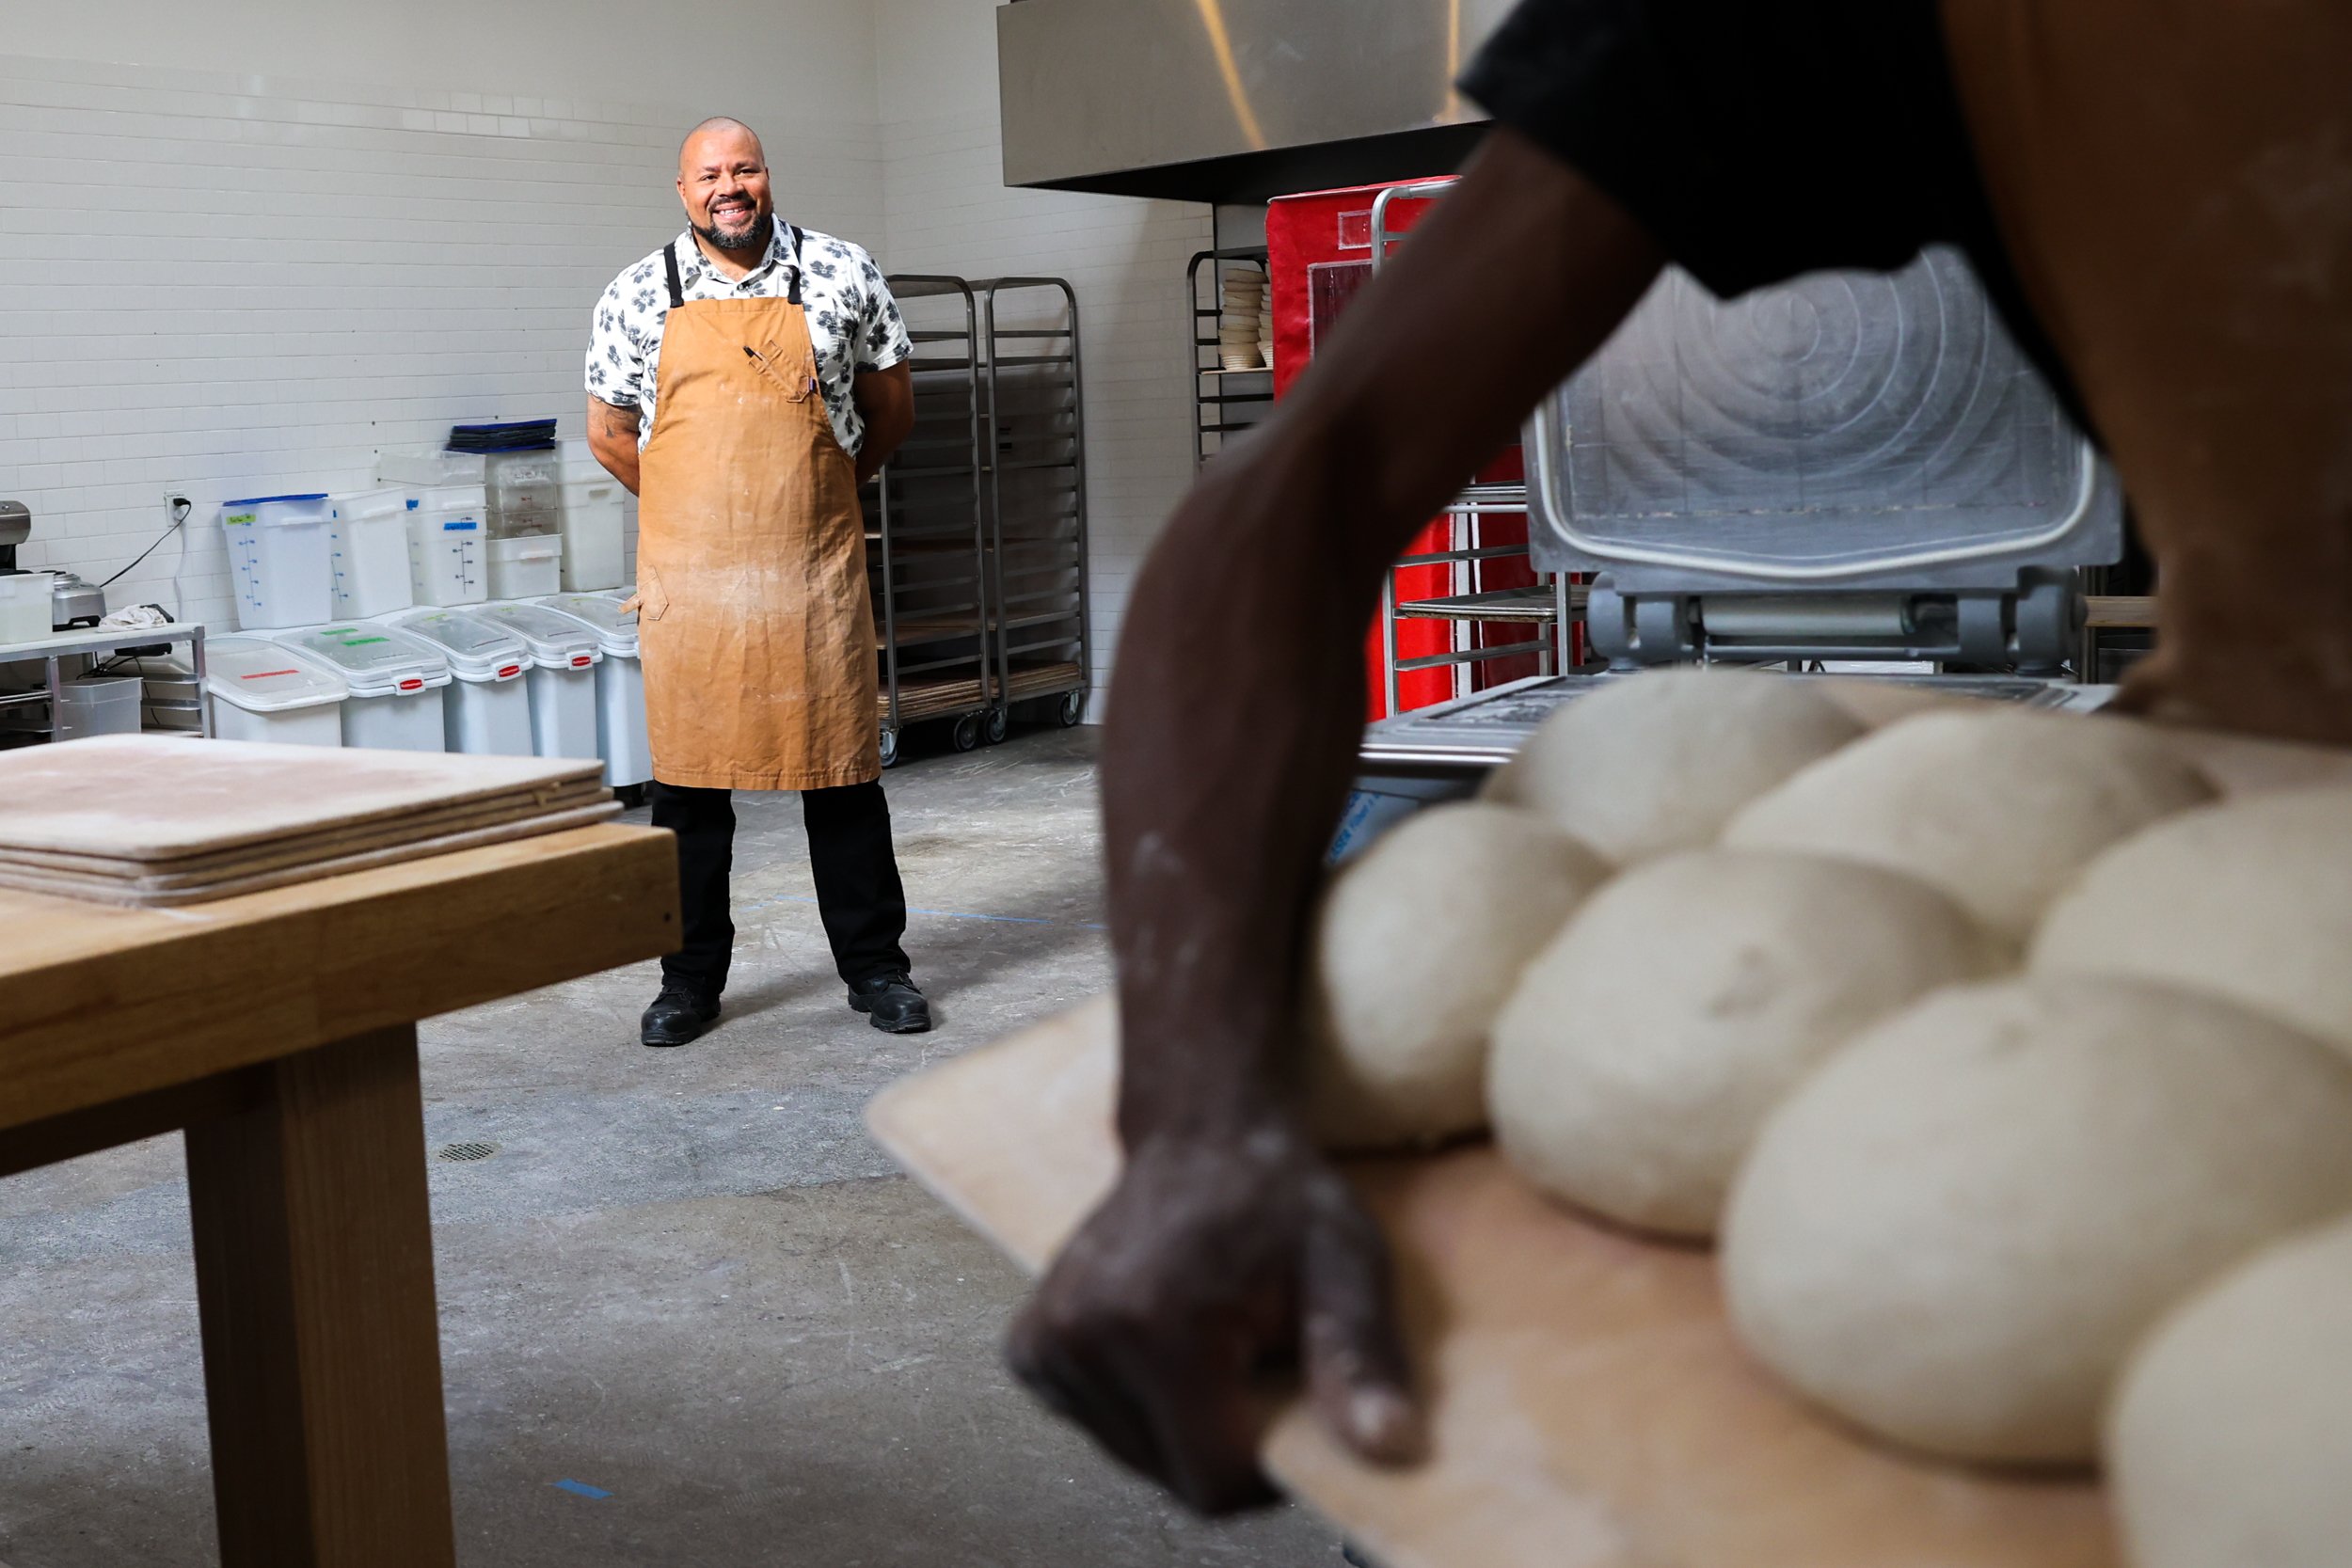  Azikiwee Anderson charges $12 for a loaf of his “OG Sourdough.” That might give some customers sticker shock, but he has his reasons.  For one thing, Anderson employs a staff of around 20 at his SoMa business, Rize Up Bakery, and he said he tries to